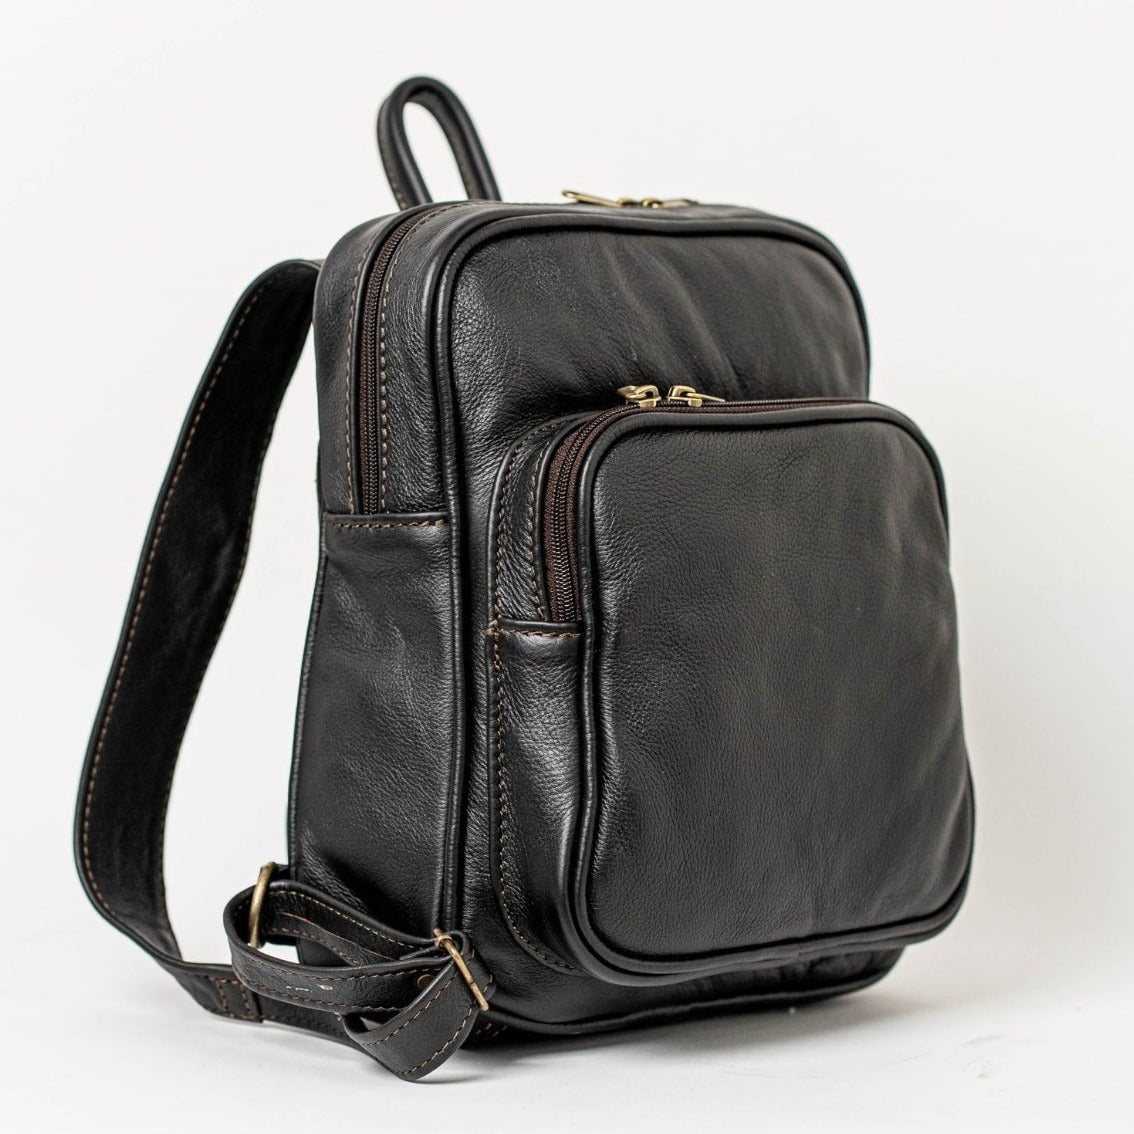 Everyday leather Backpacks in dark brown colour from cape Masai leather 